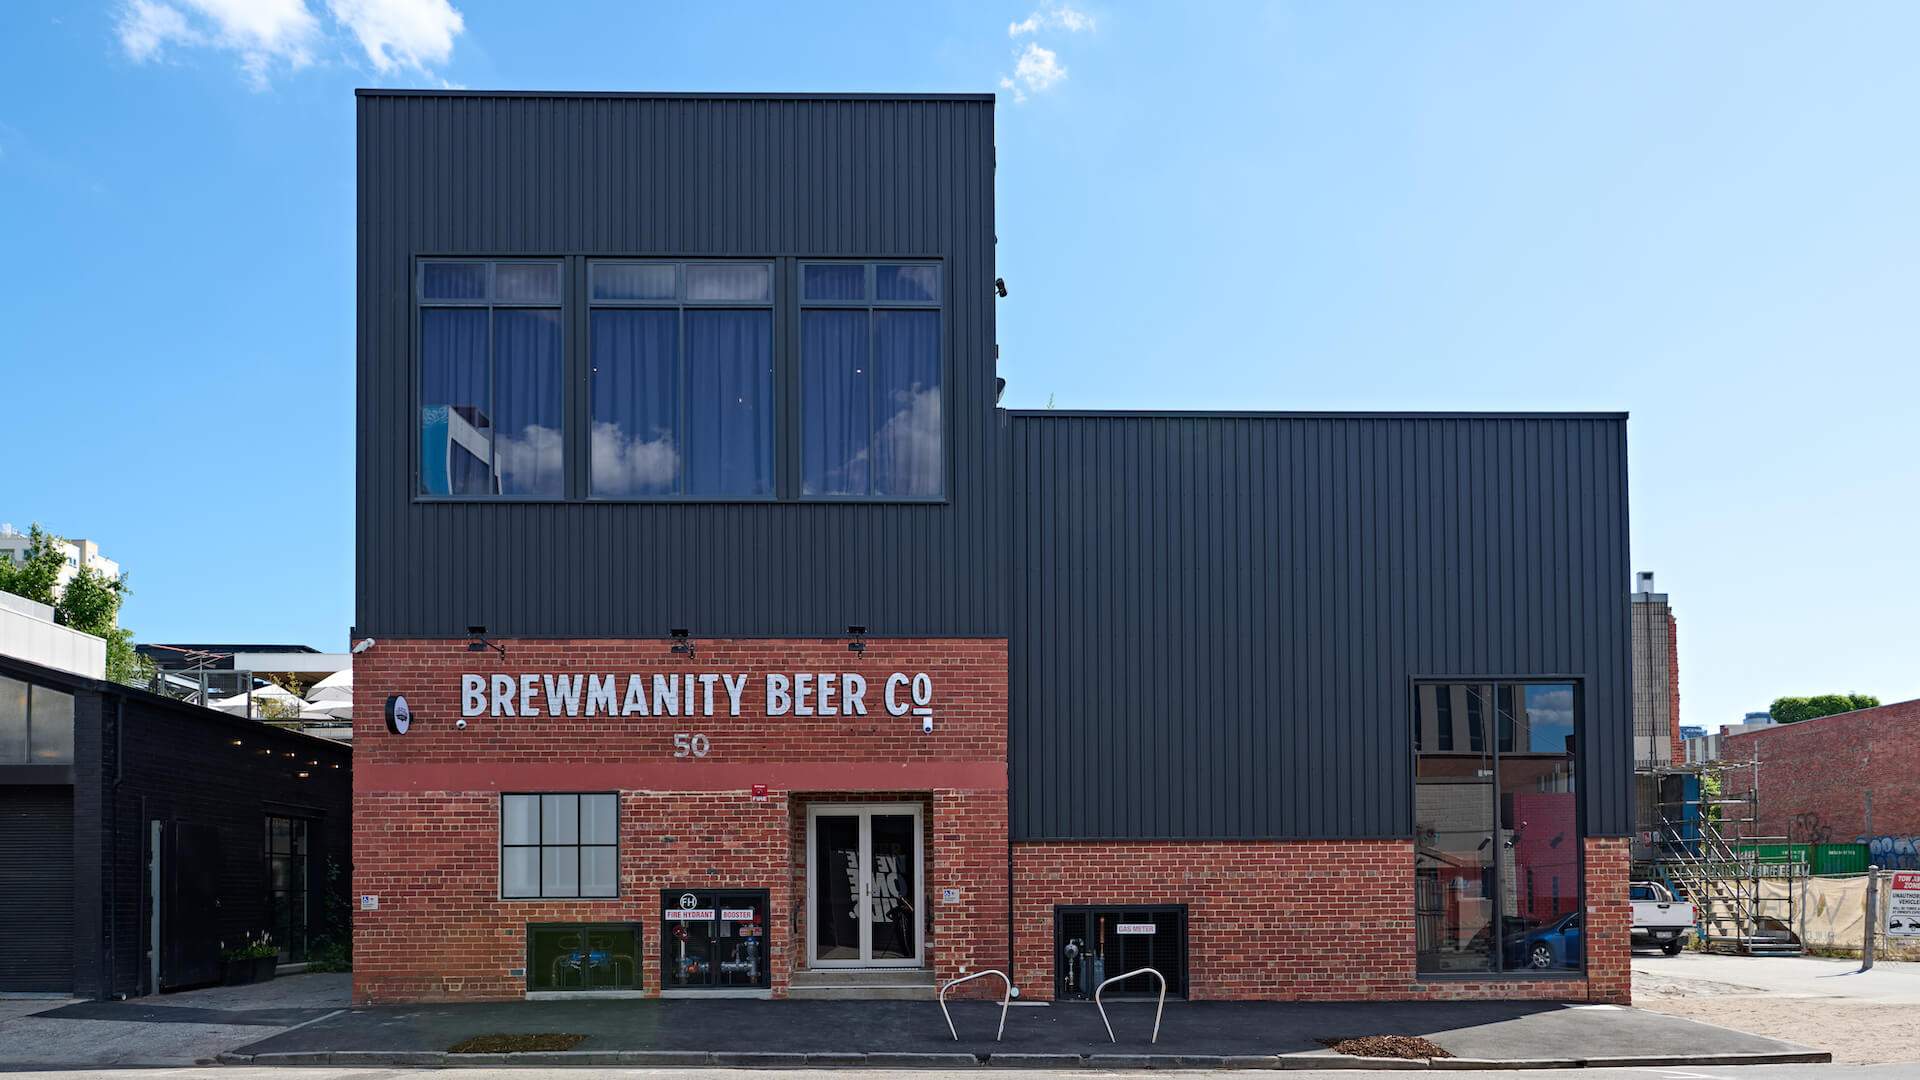 Brewmanity Brewery Bar in South Melbourne